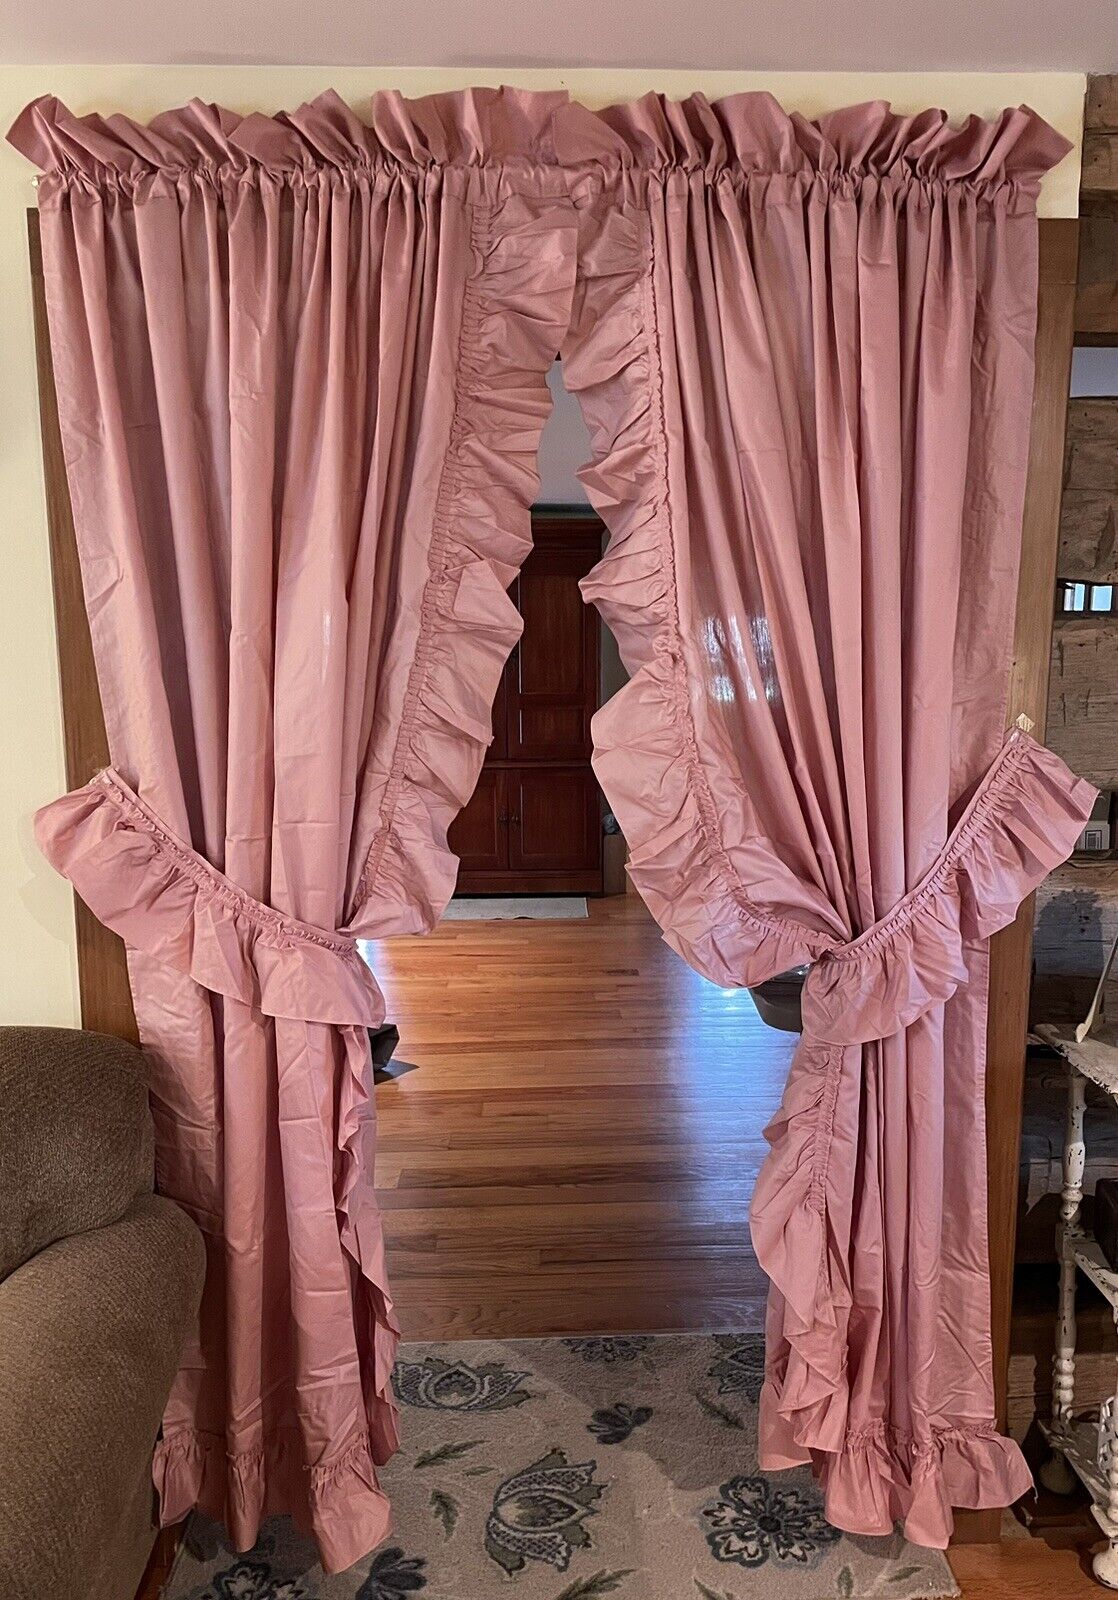 Pair of Sears Dusty Rose Ruffled Country Curtains (ea.64”x82” flat) Vintage 1980